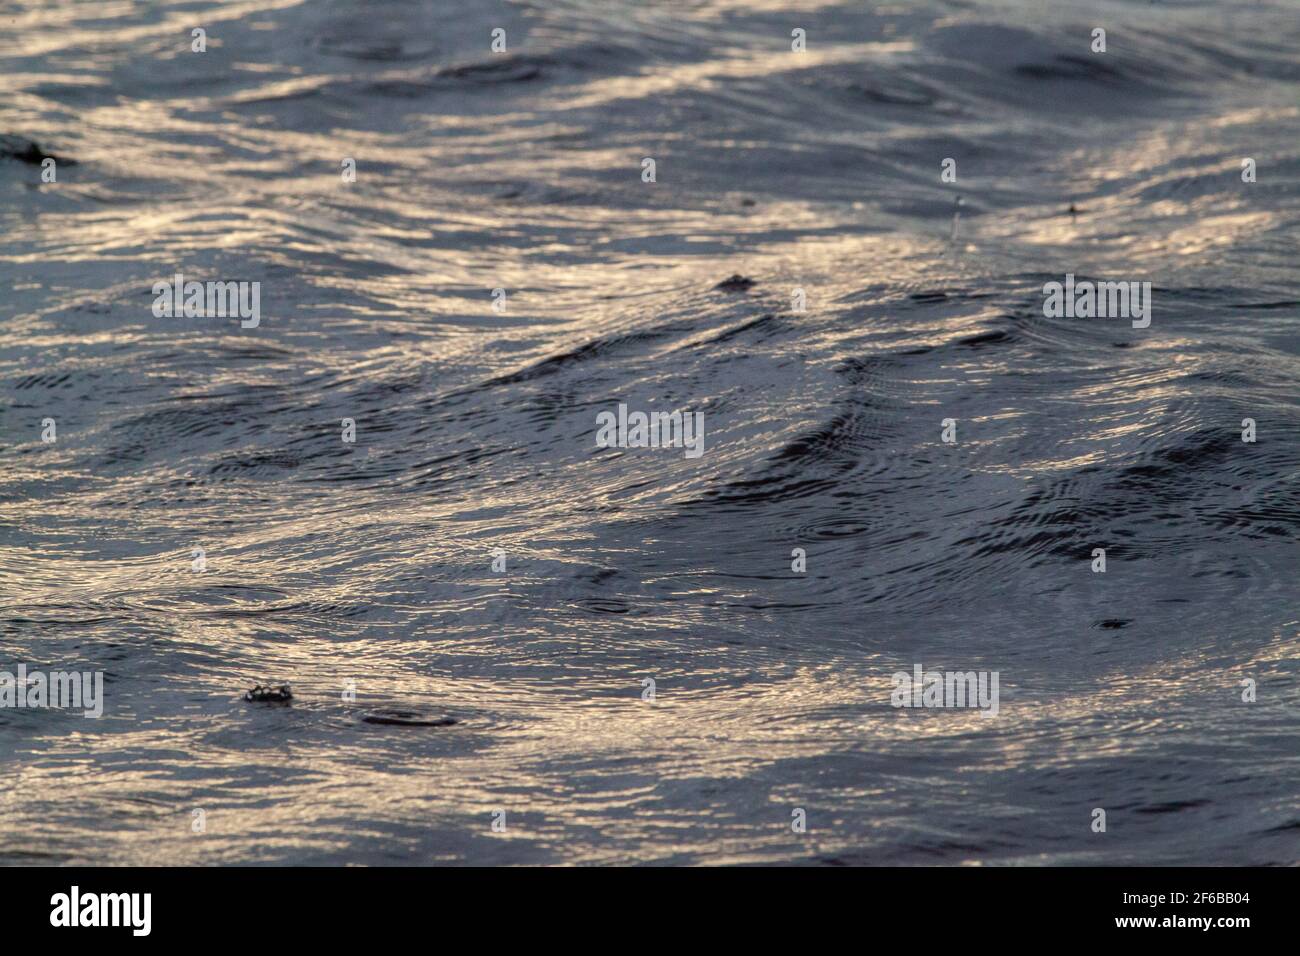 Swelling, upwelling, transitory movements on a freshwater river surface. Textured side light waves occasional bouncing raindrops. Weather Mood changes Stock Photo